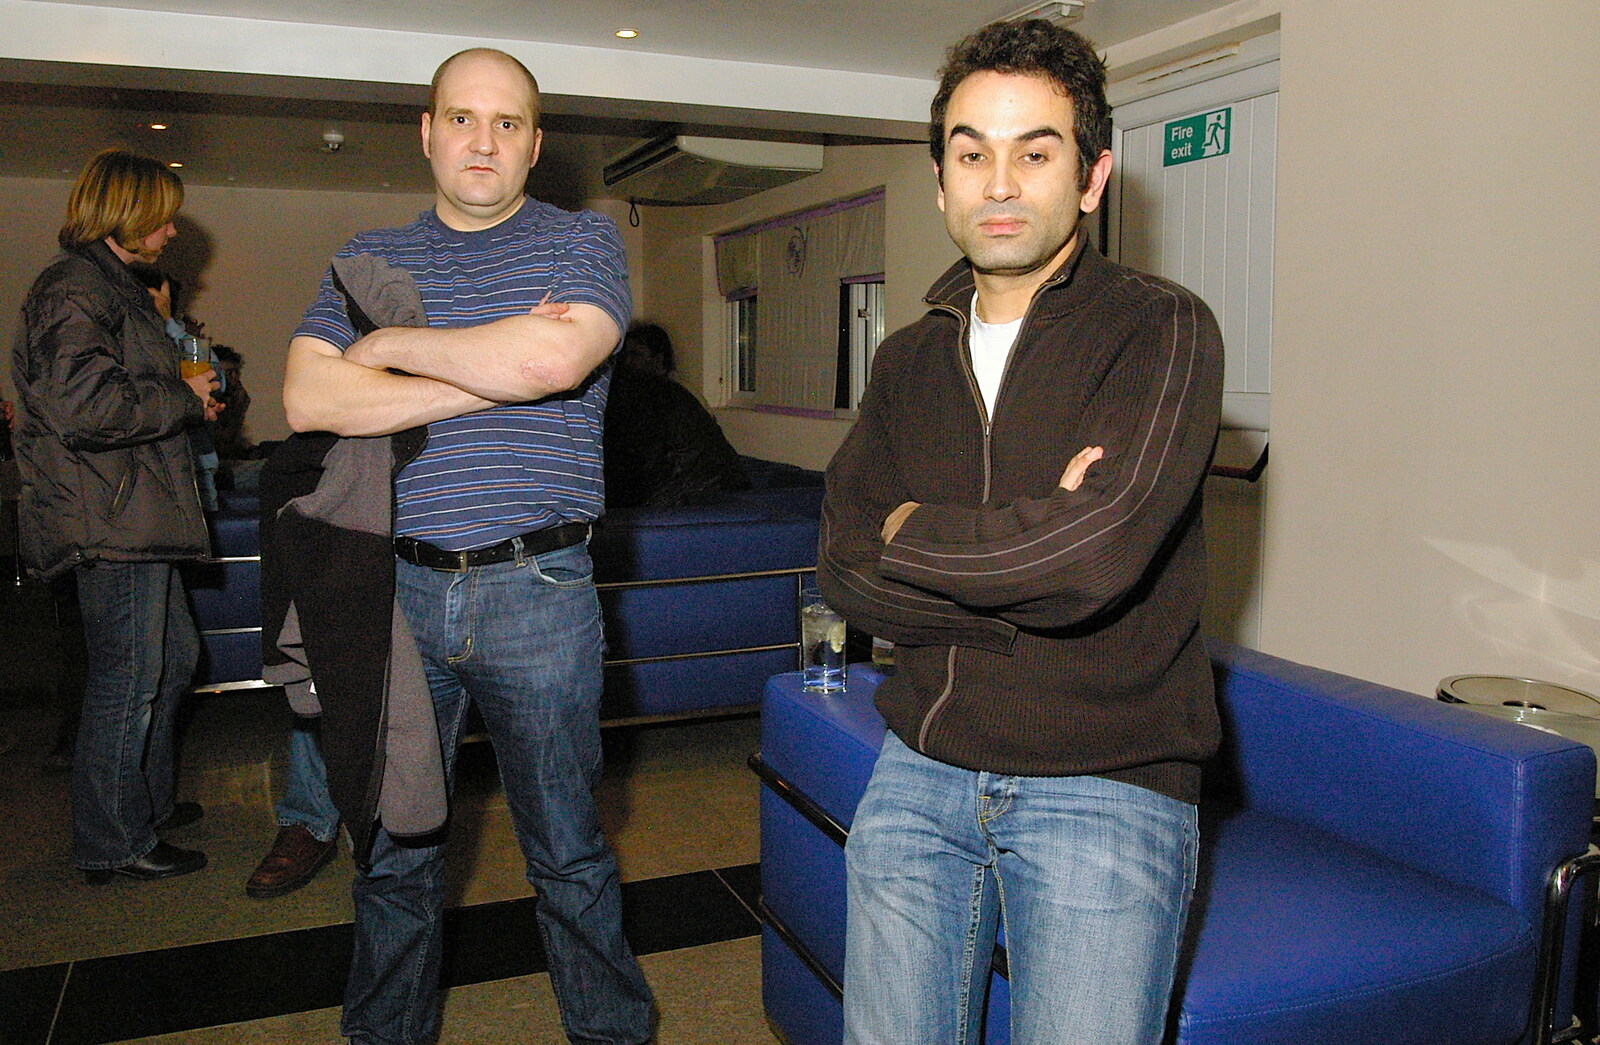 Francis and Arun from Qualcomm goes Karting in Caxton, Cambridgeshire - 7th November 2005